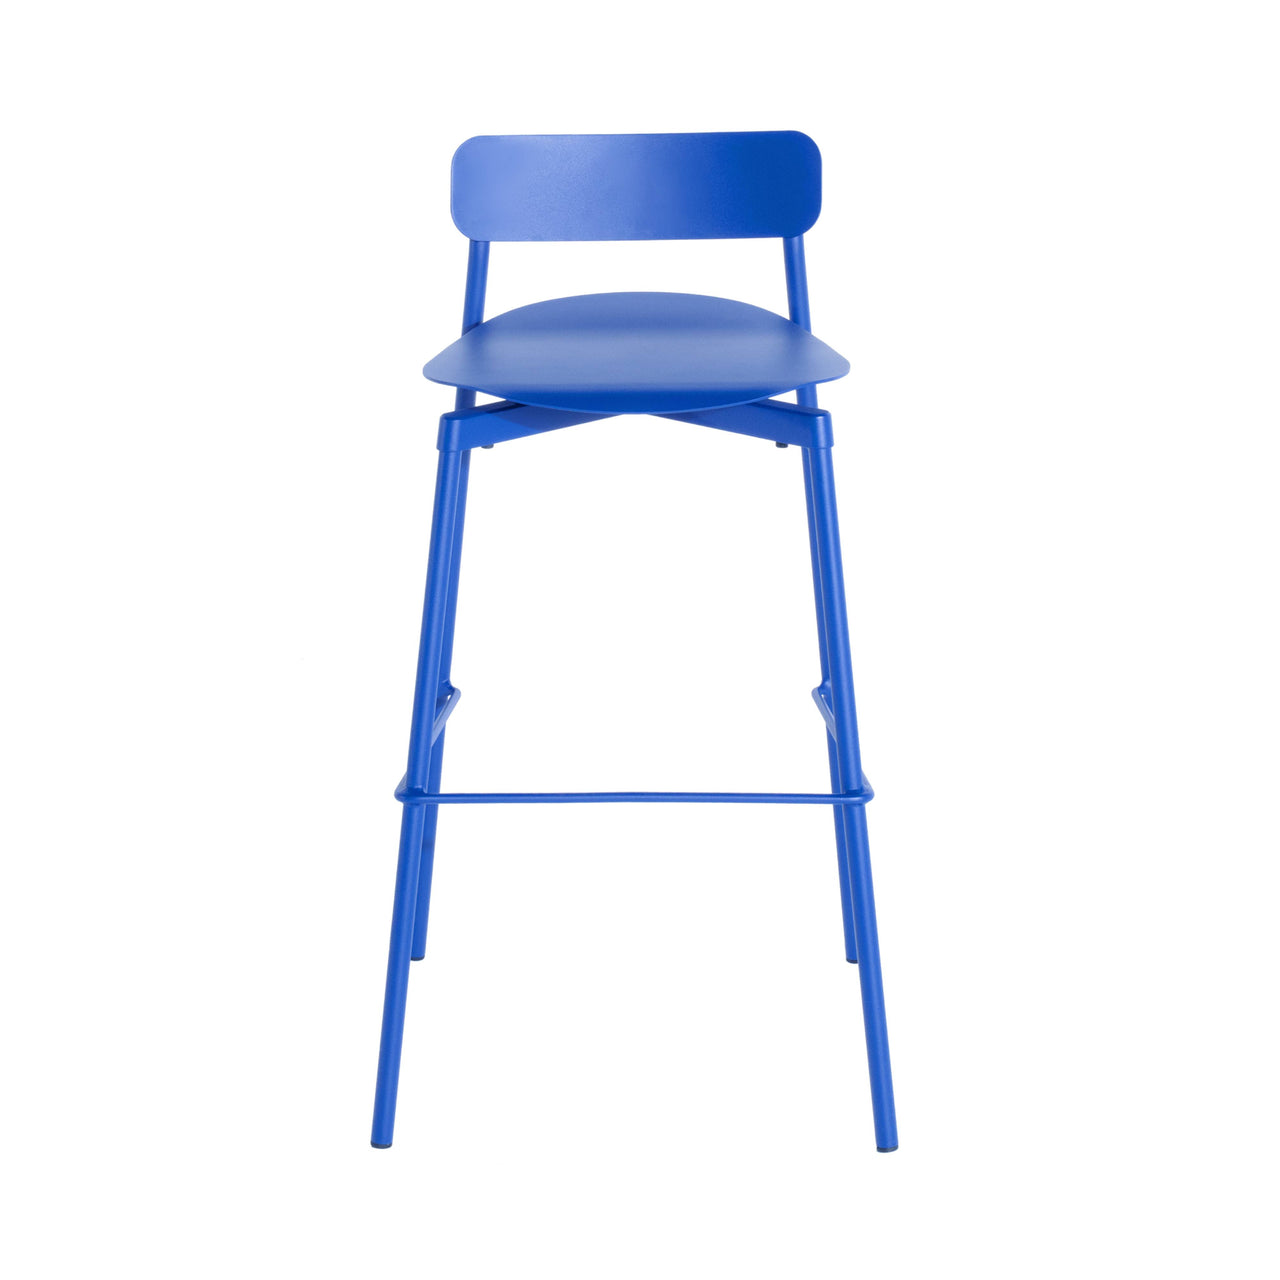  Fromme Stacking Bar + Counter Stool: Bar + Blue